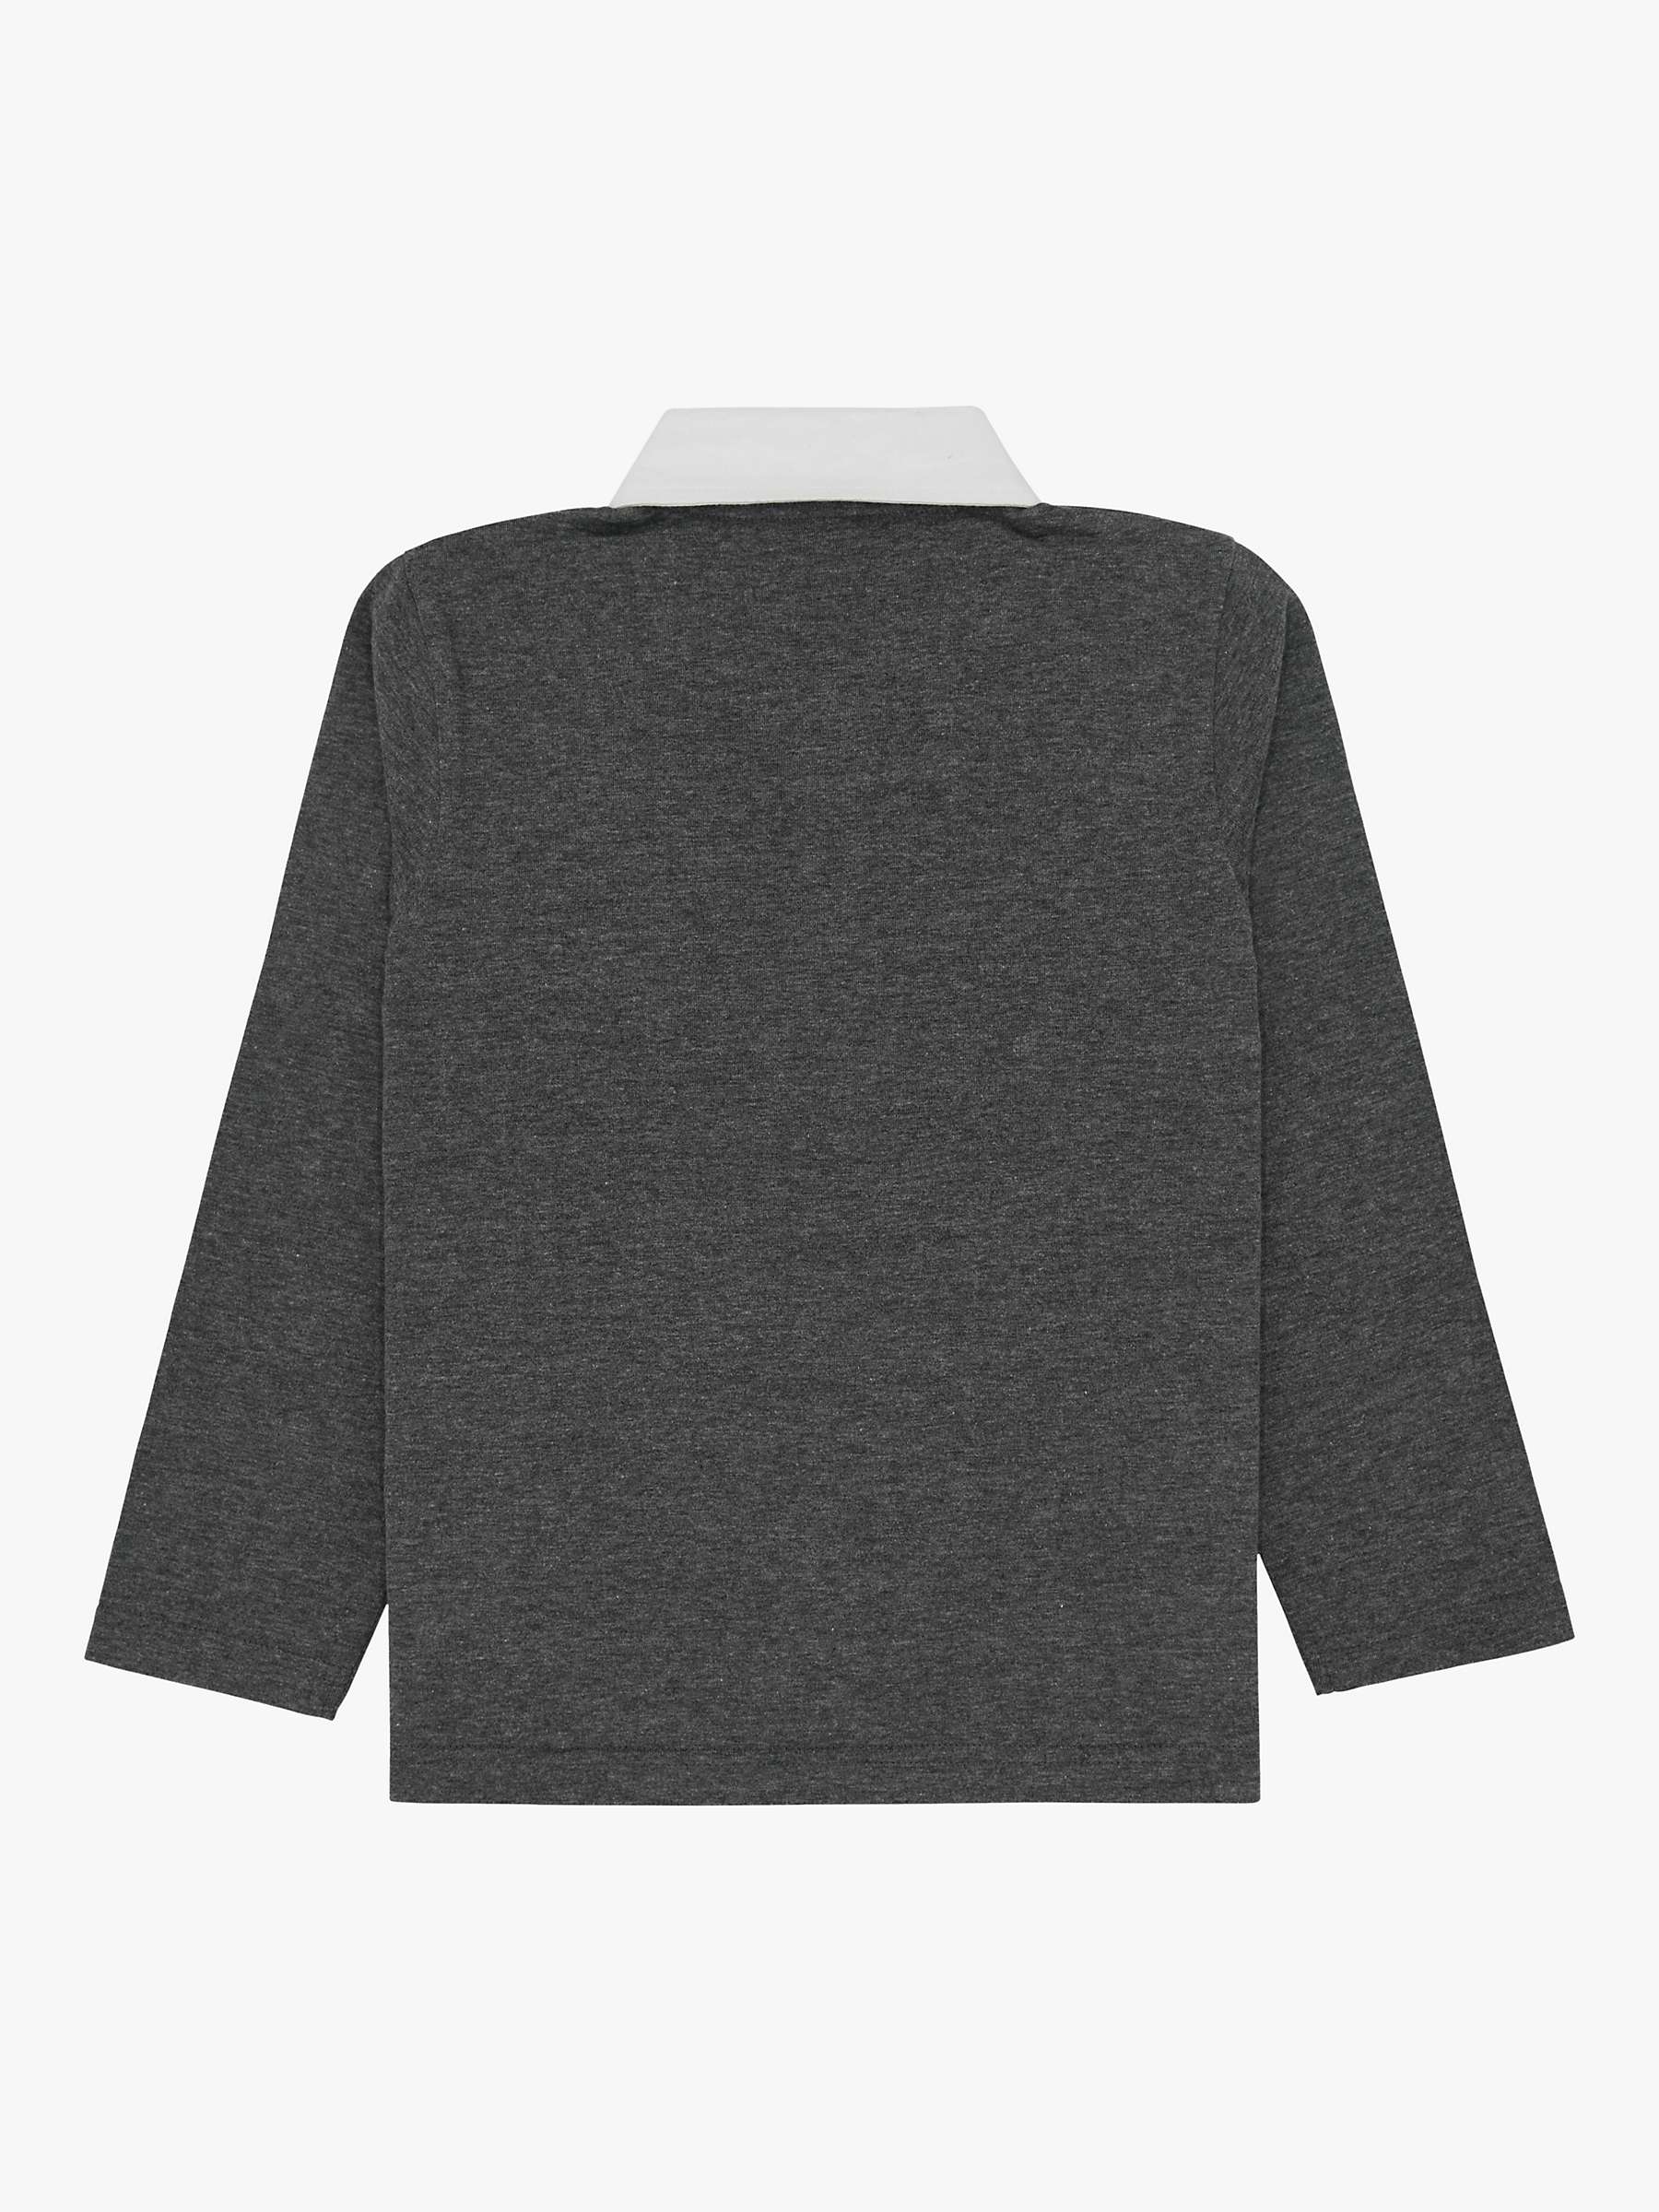 Buy Fabric Flavours Kids' Harry Potter Syltherin Uniform Long Sleeve Top, Grey Online at johnlewis.com